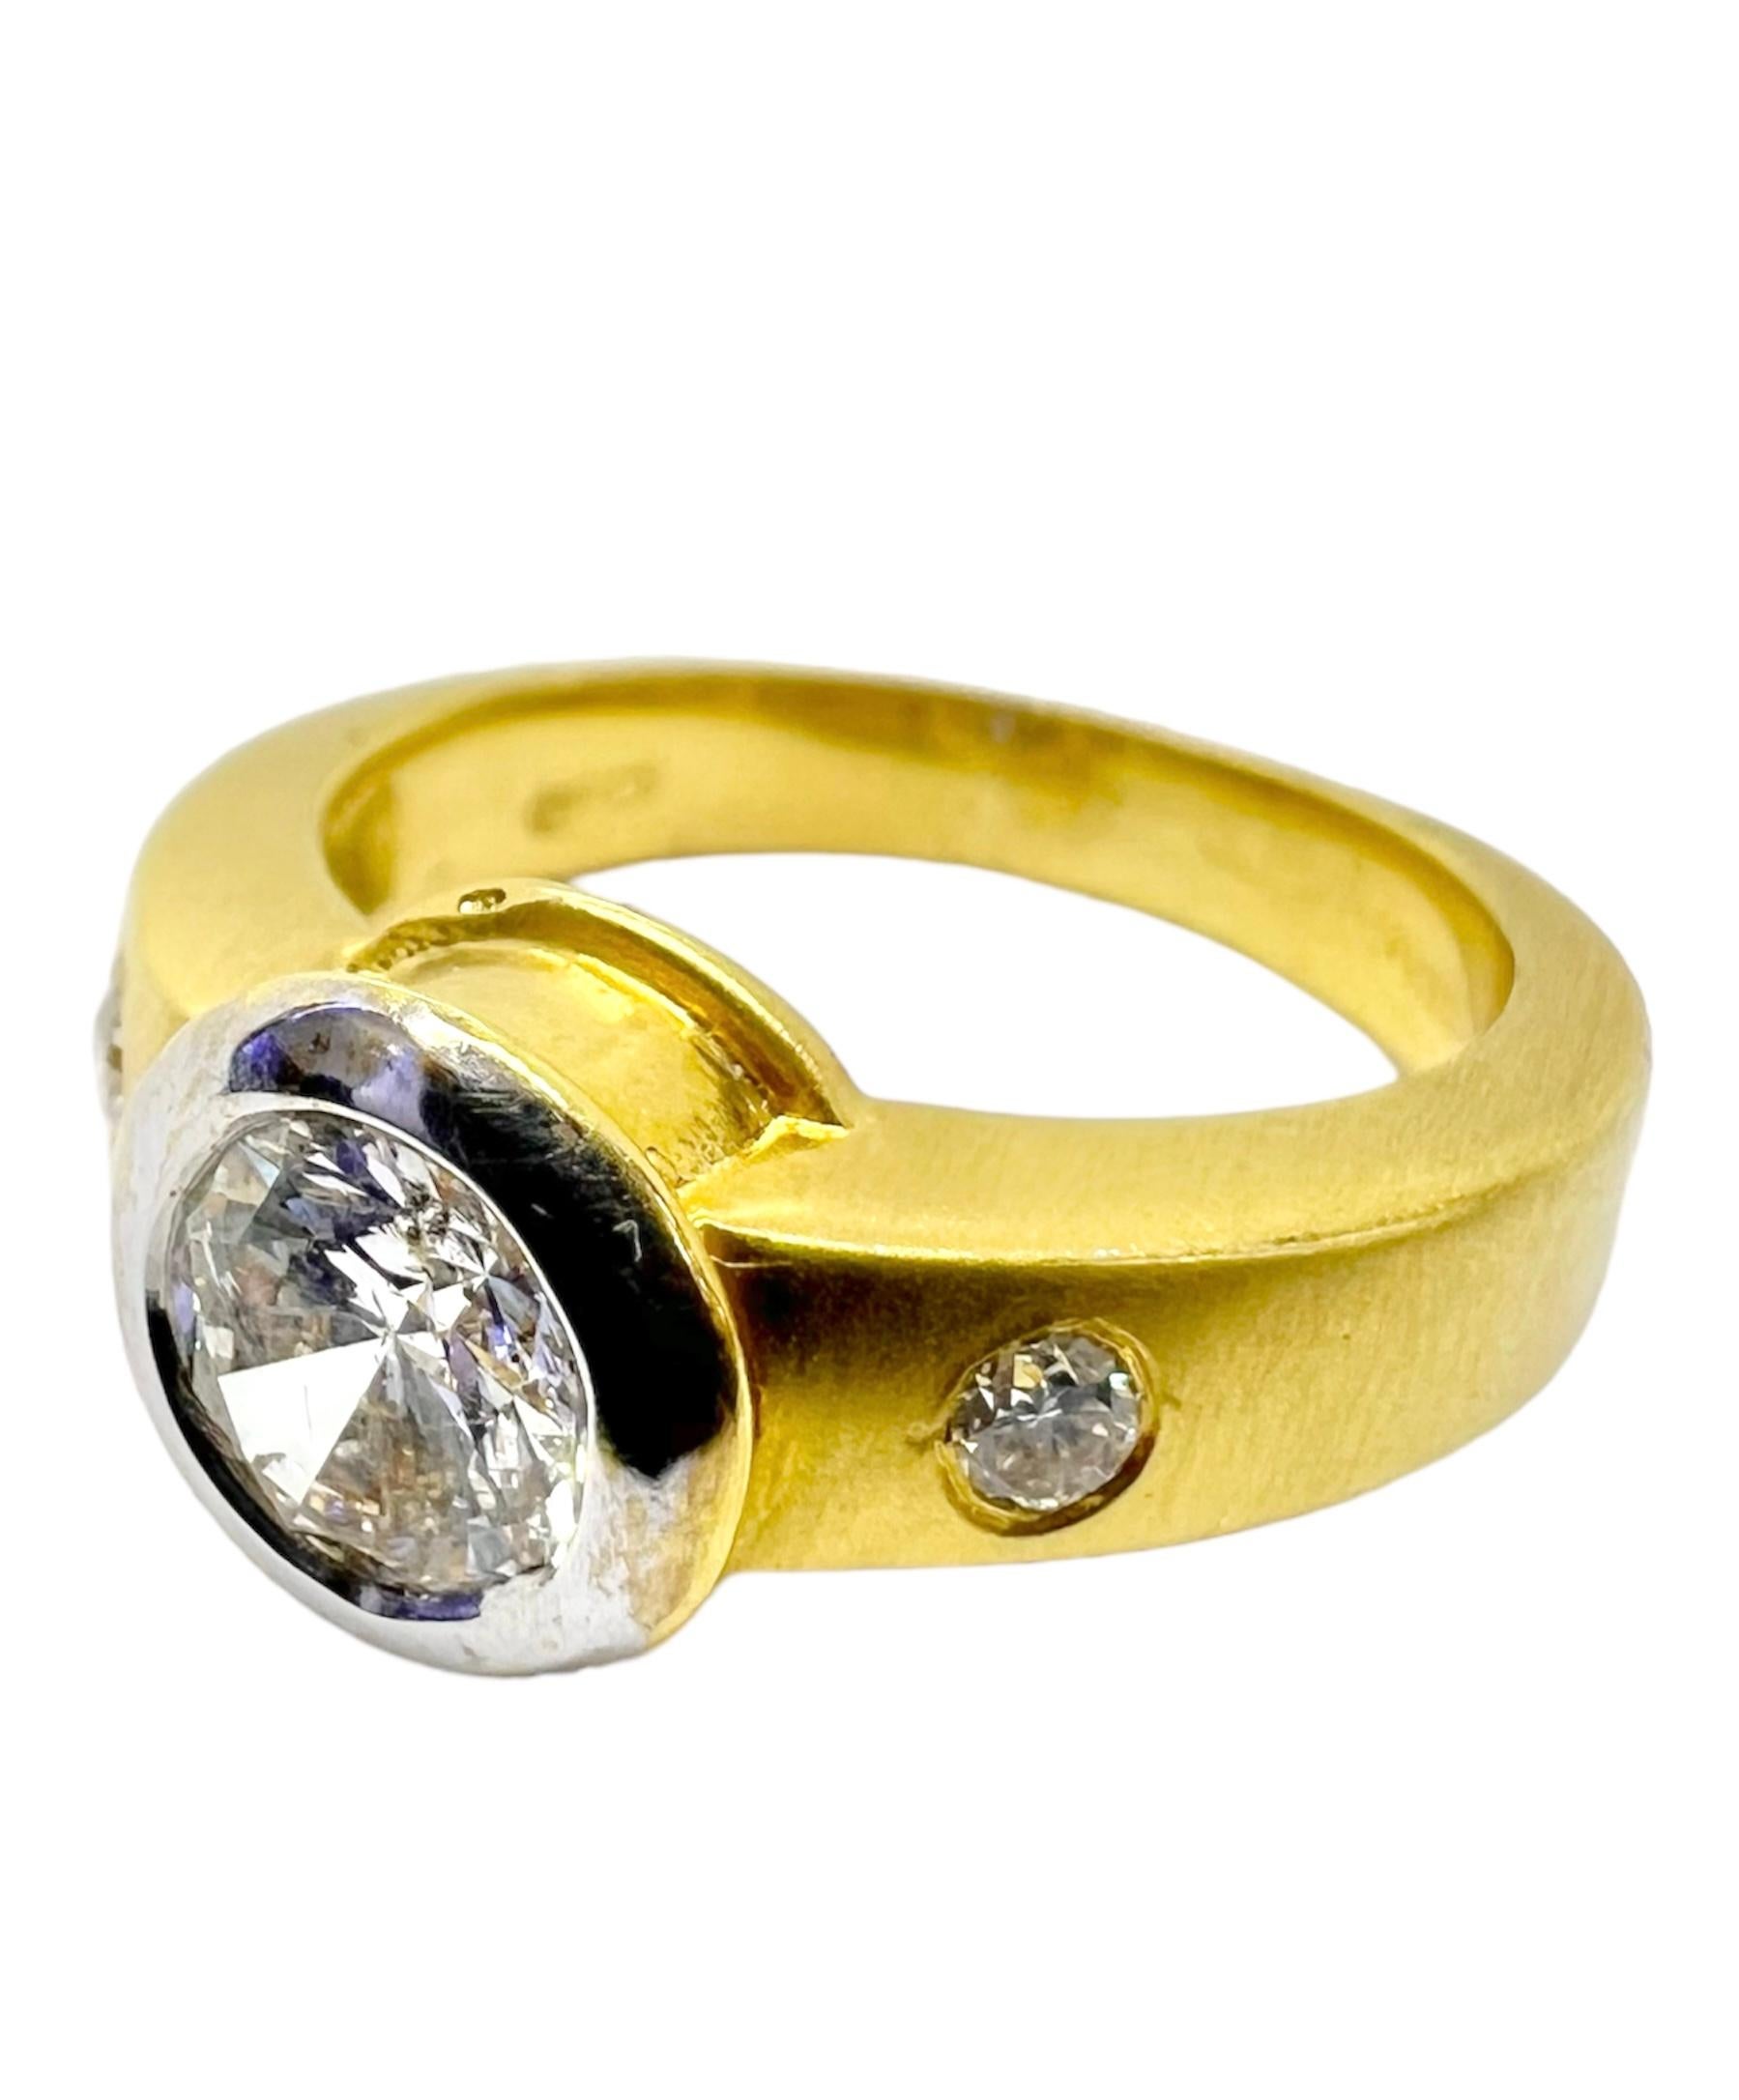 18K yellow gold with center round diamond with 2 small round diamonds.

Sophia D by Joseph Dardashti LTD has been known worldwide for 35 years and are inspired by classic Art Deco design that merges with modern manufacturing techniques.  